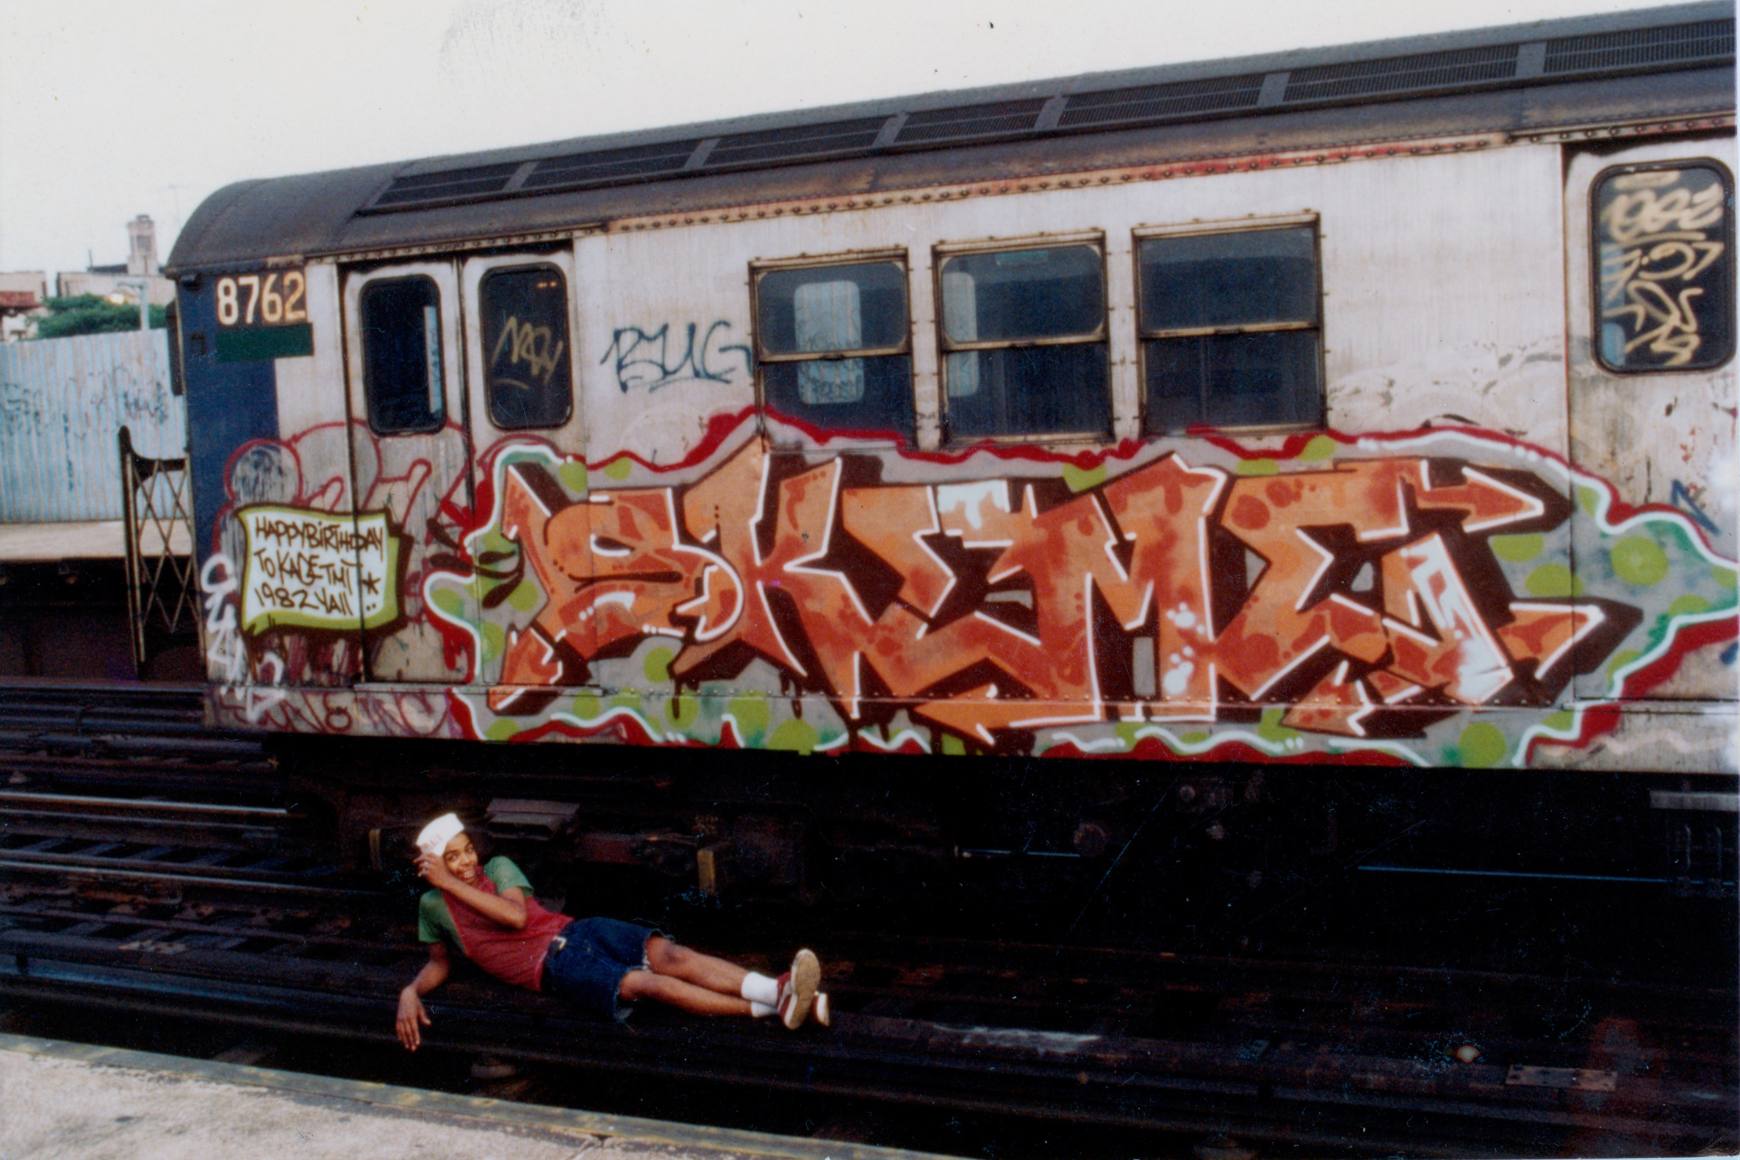 Skeme lies on the subway track below a parked subway car with a large orange artwork by him splashed across it. 